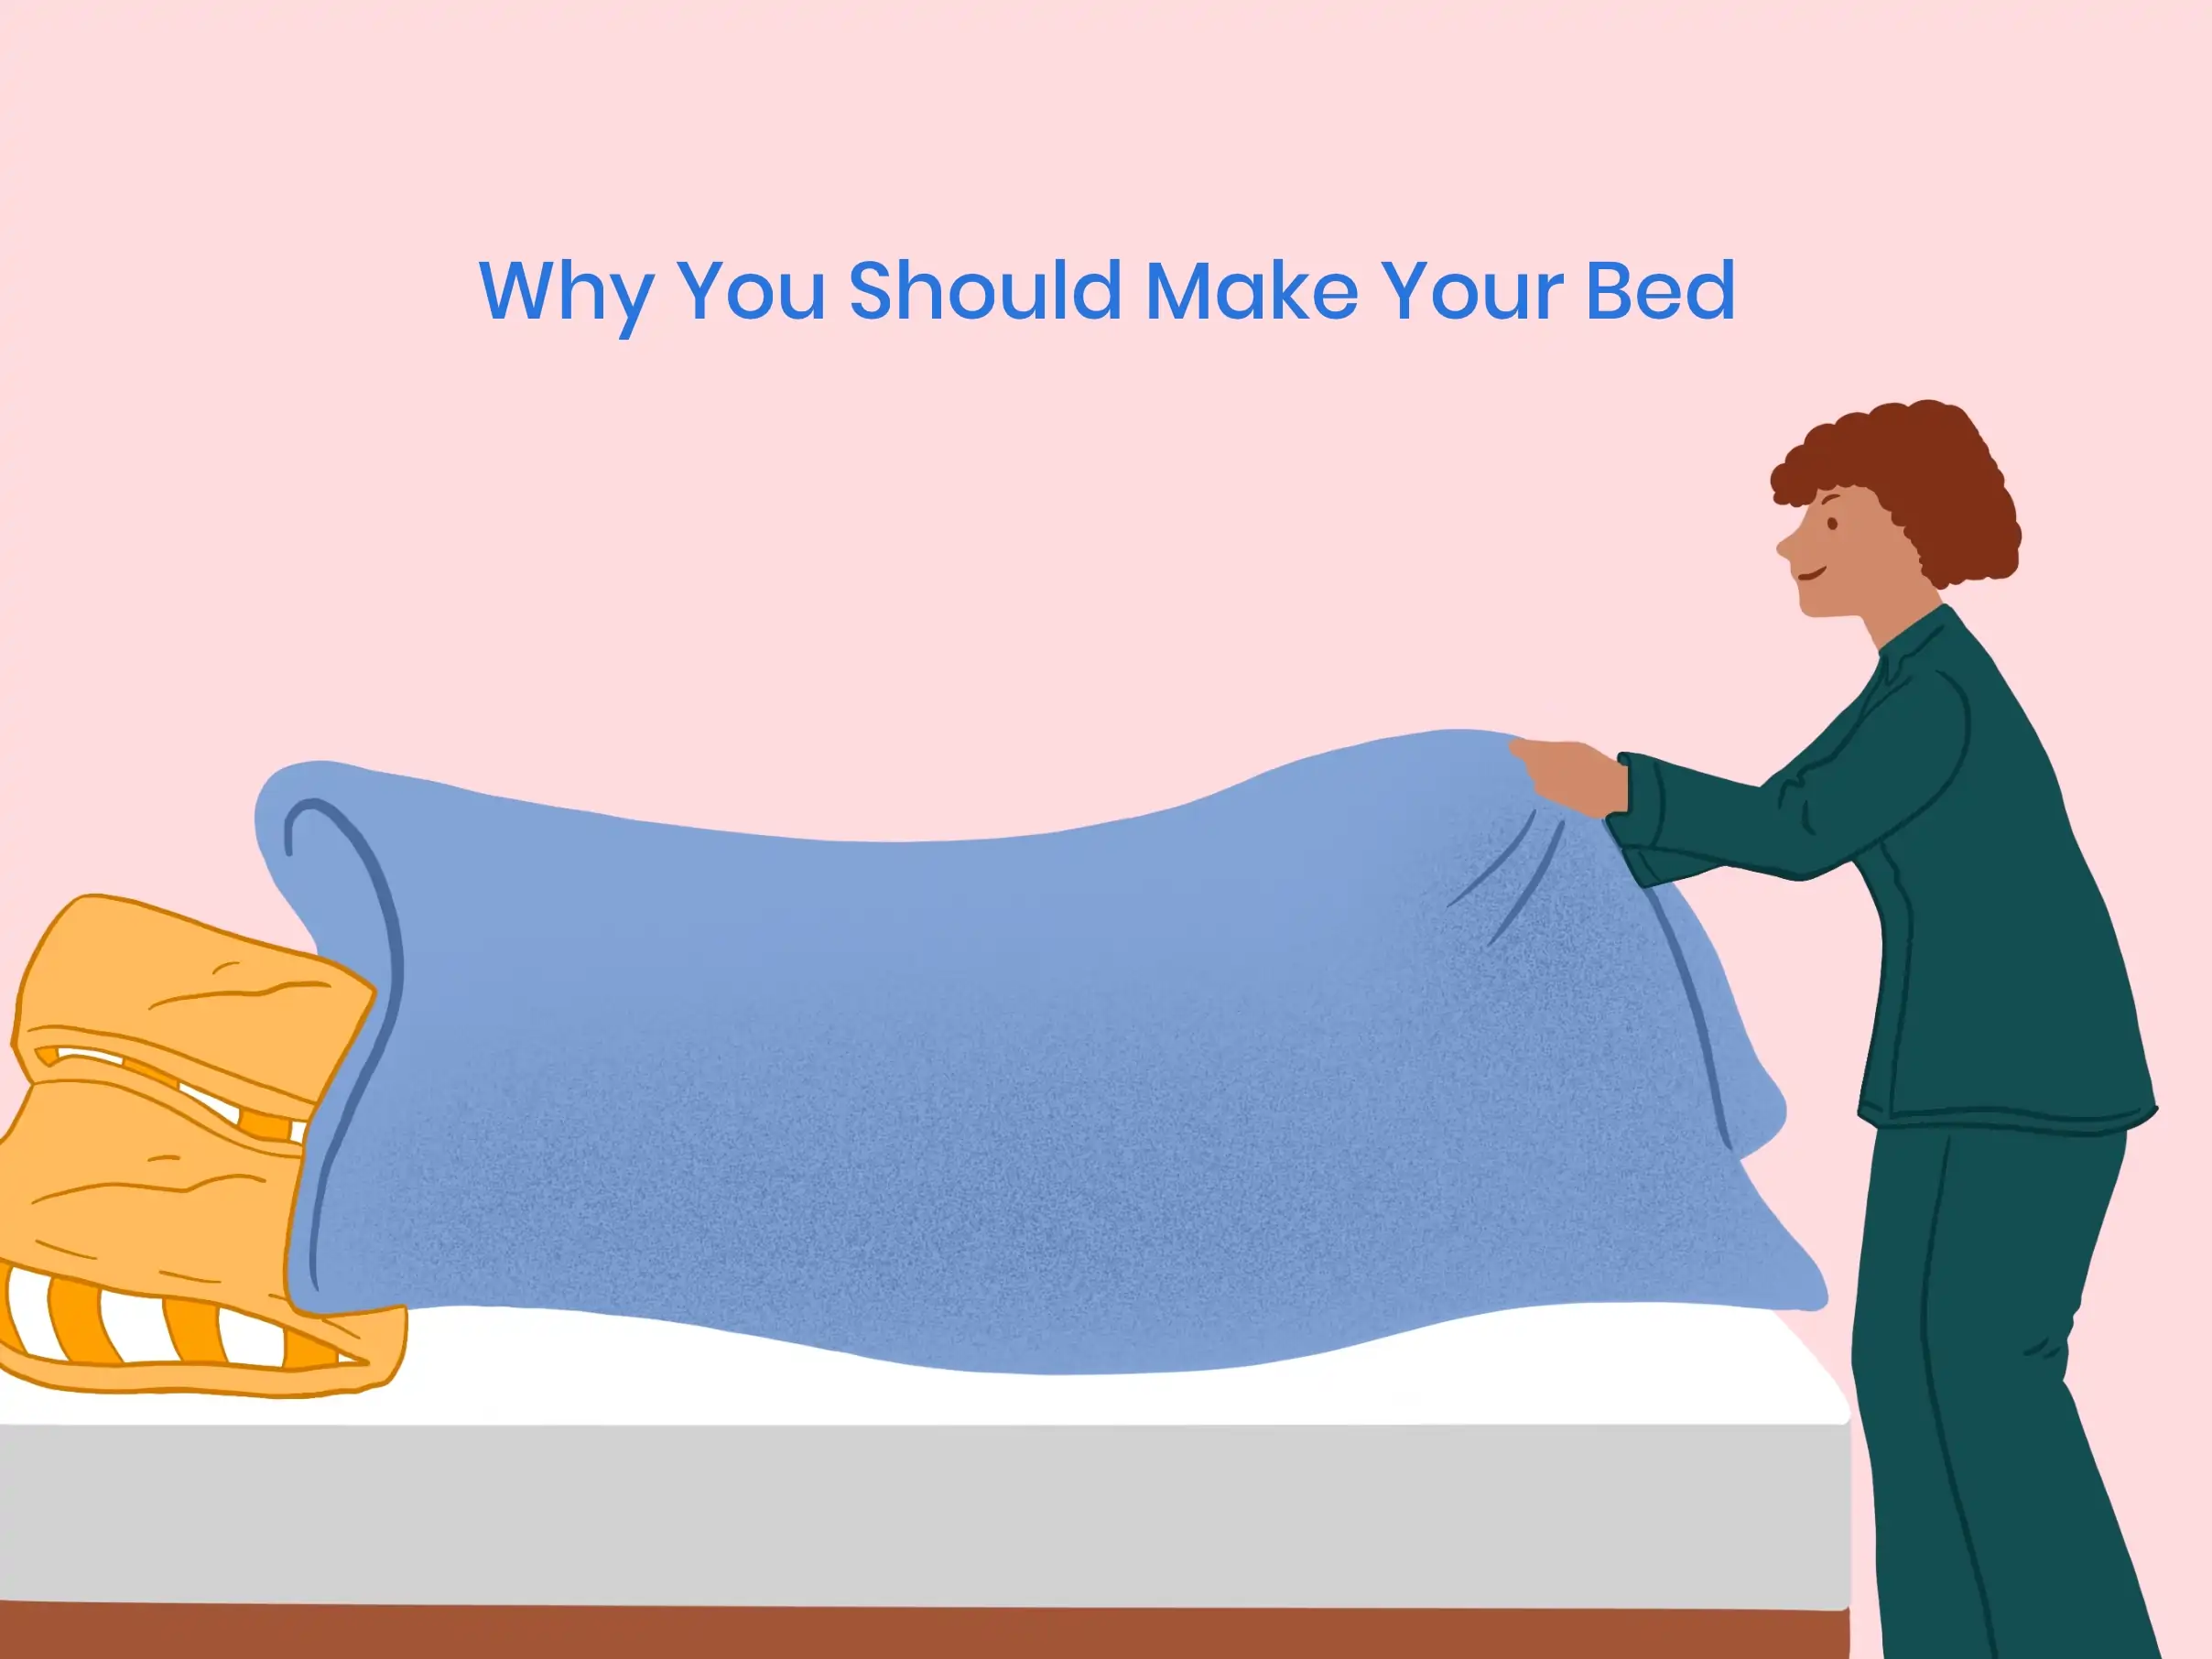 Illustration of Why You Should Make Your Bed